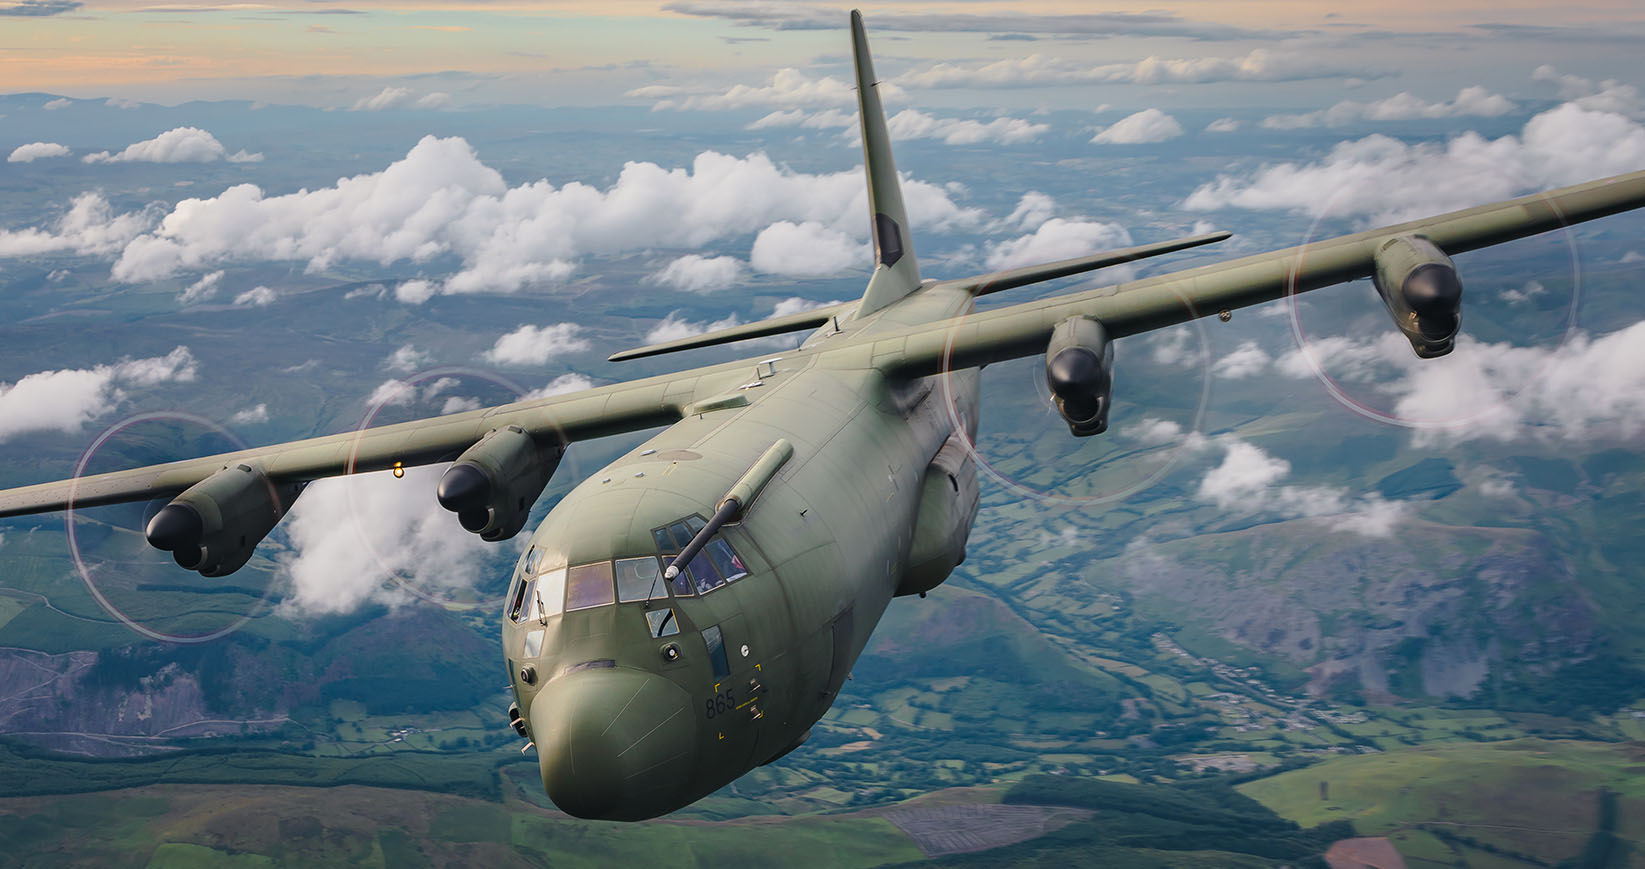 Image shows the RAF Hercules in flight through the clouds.